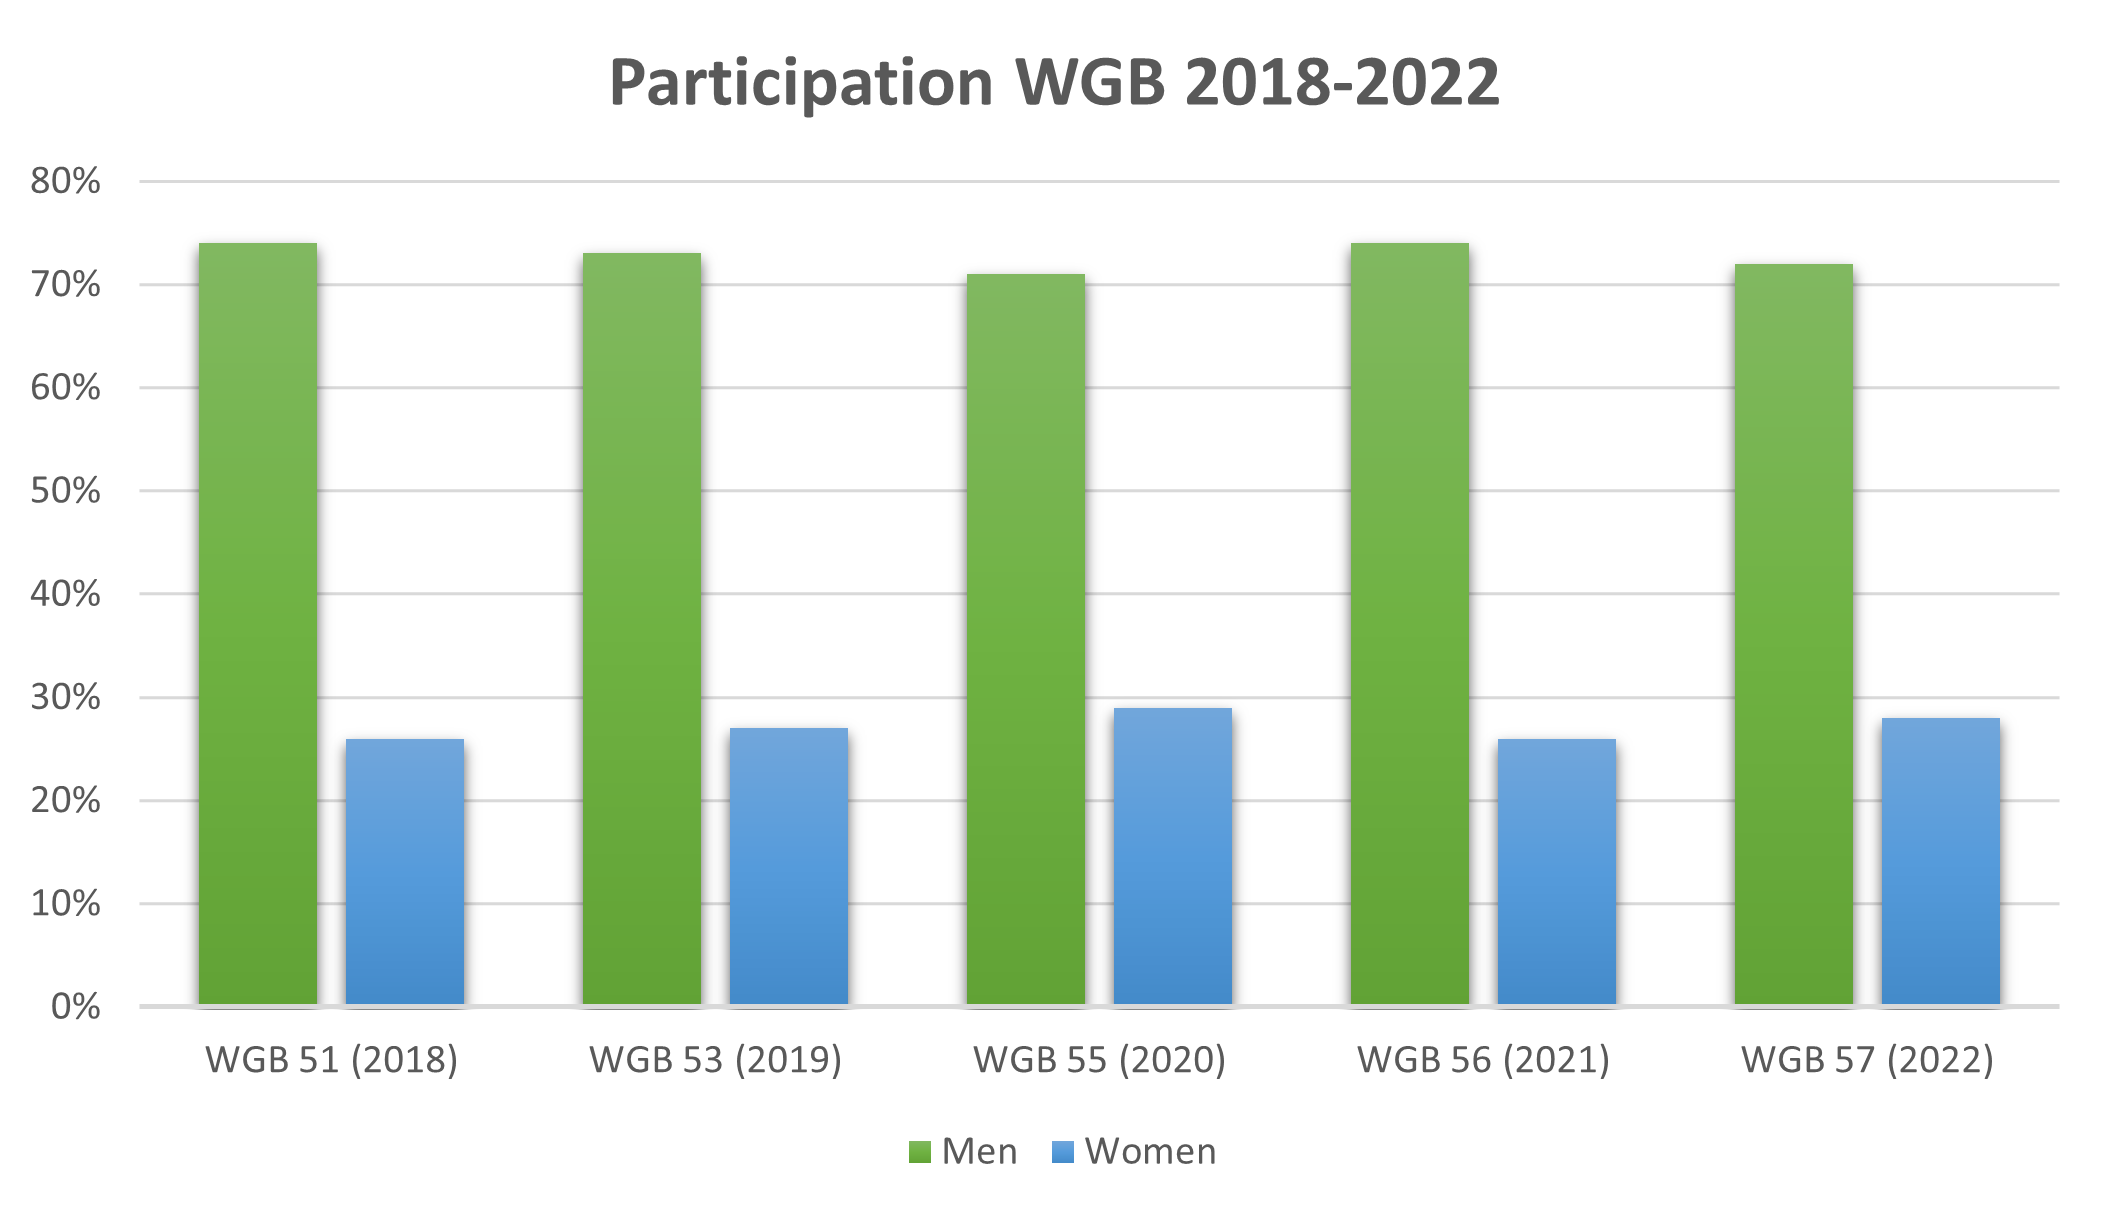 The CTBT Young Professionals Network investigated the list of participants at Working Group B (WGB) from 2018 till 2022. 